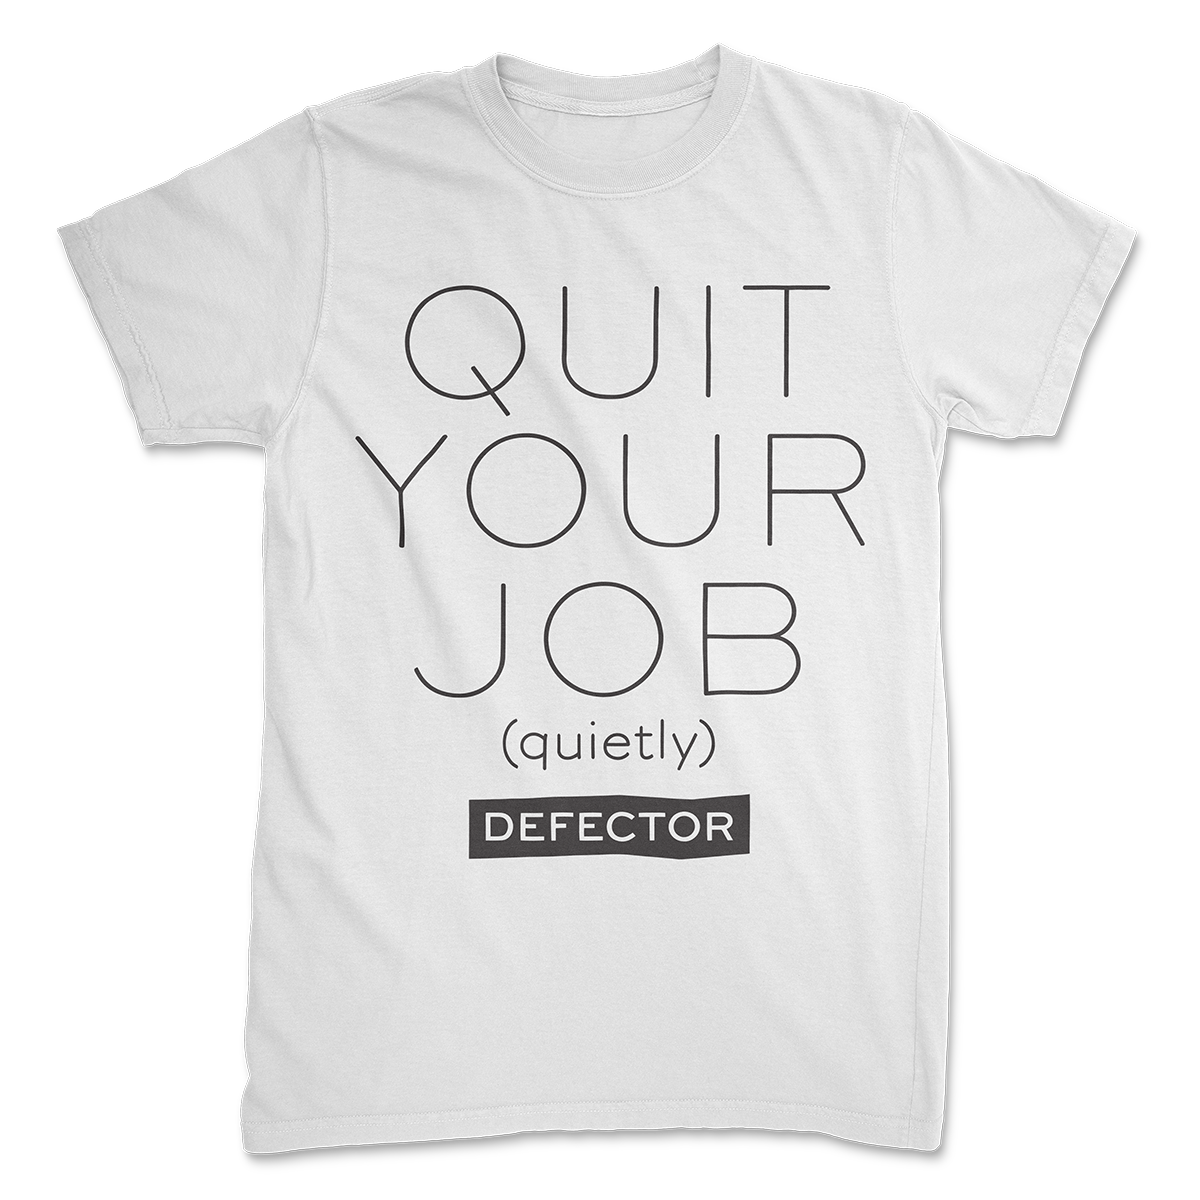 A white shirt that says QUIT YOUR JOB (quietly) with the Defector logo below that. Print is oversized.